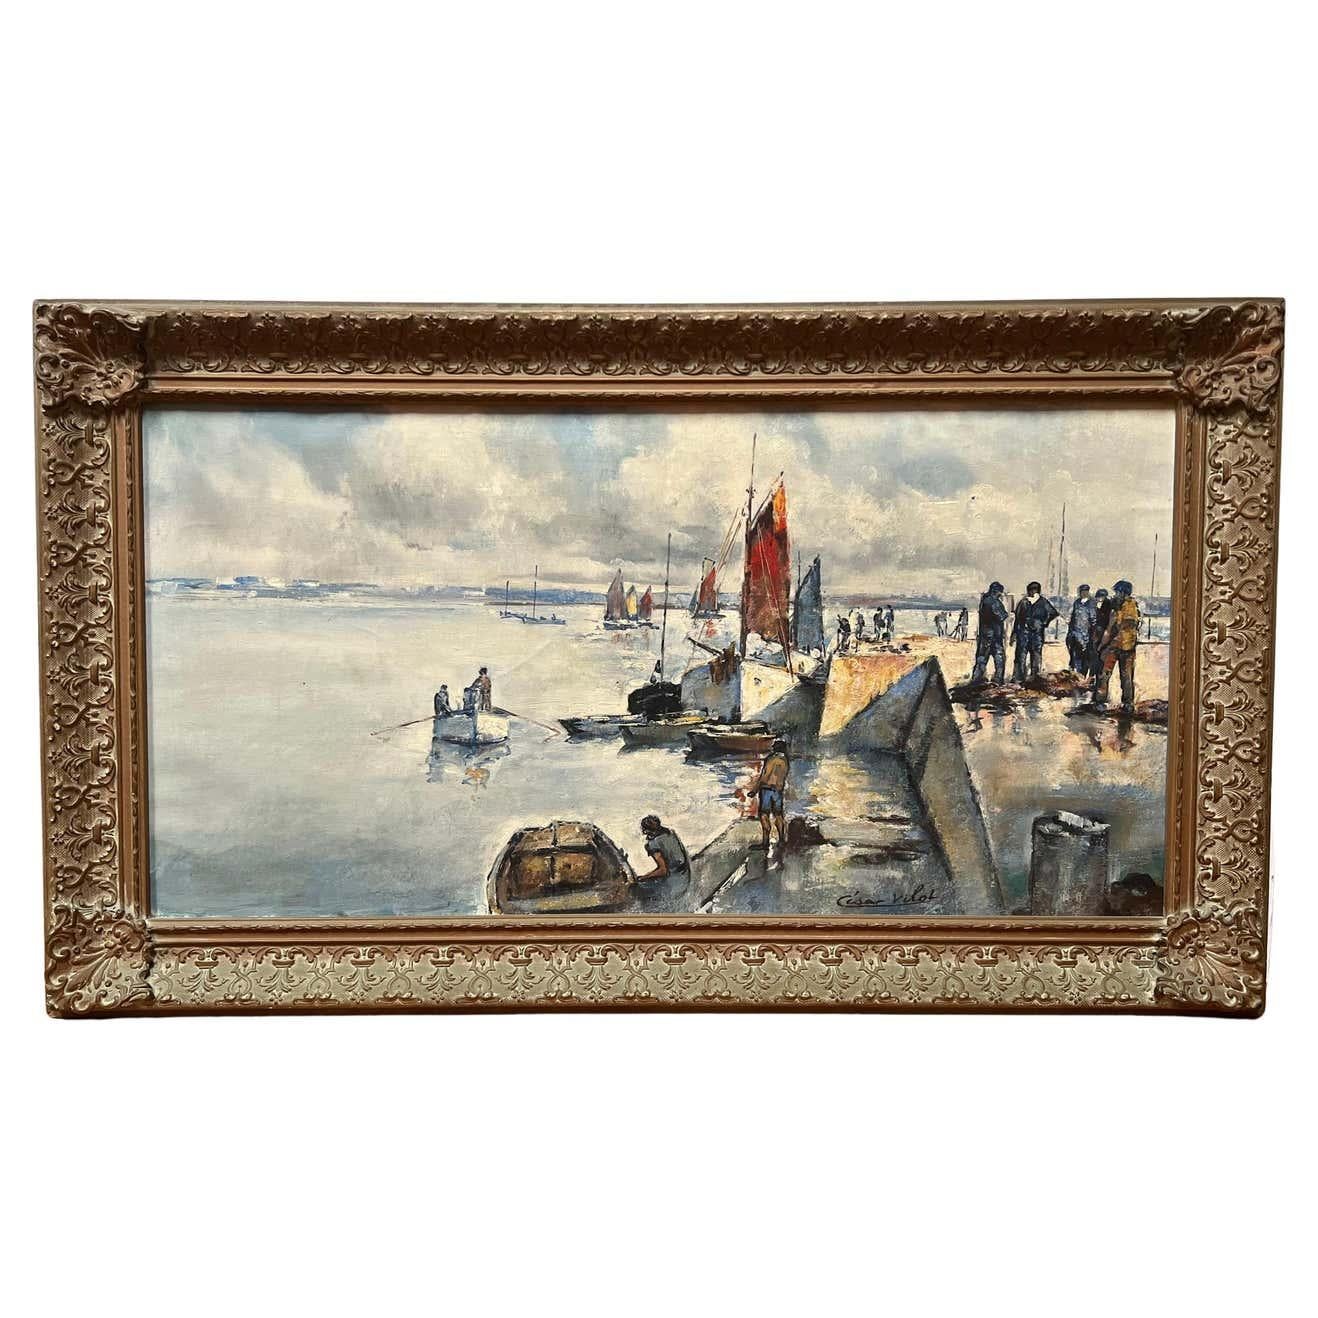 French Dock and Seascape by Cesar Vilol - Painting by Cesar Vilot